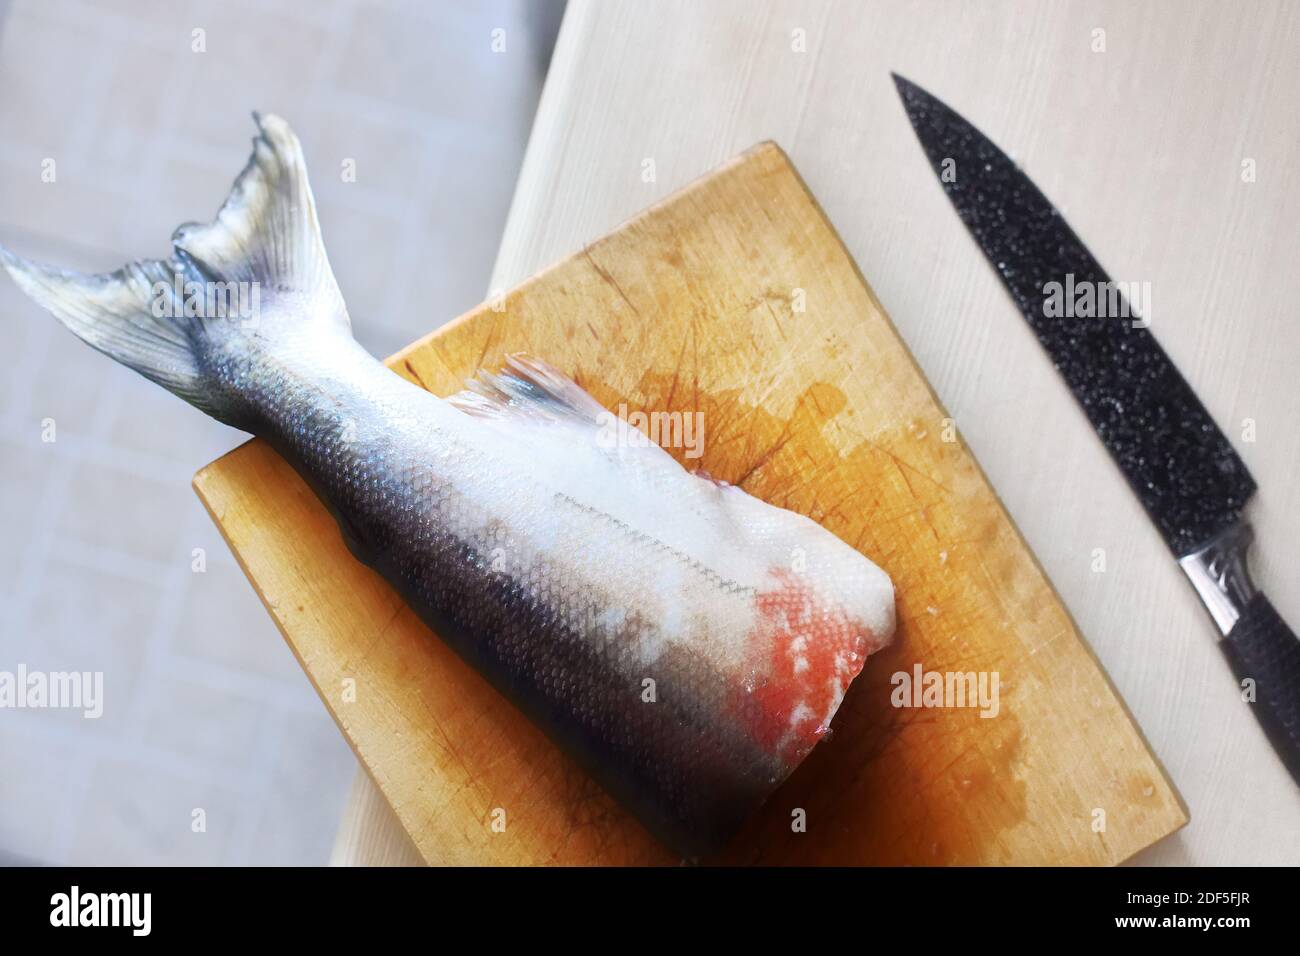 On the cutting Board is a piece of fish and a knife. The cooking process of the fish.  Stock Photo